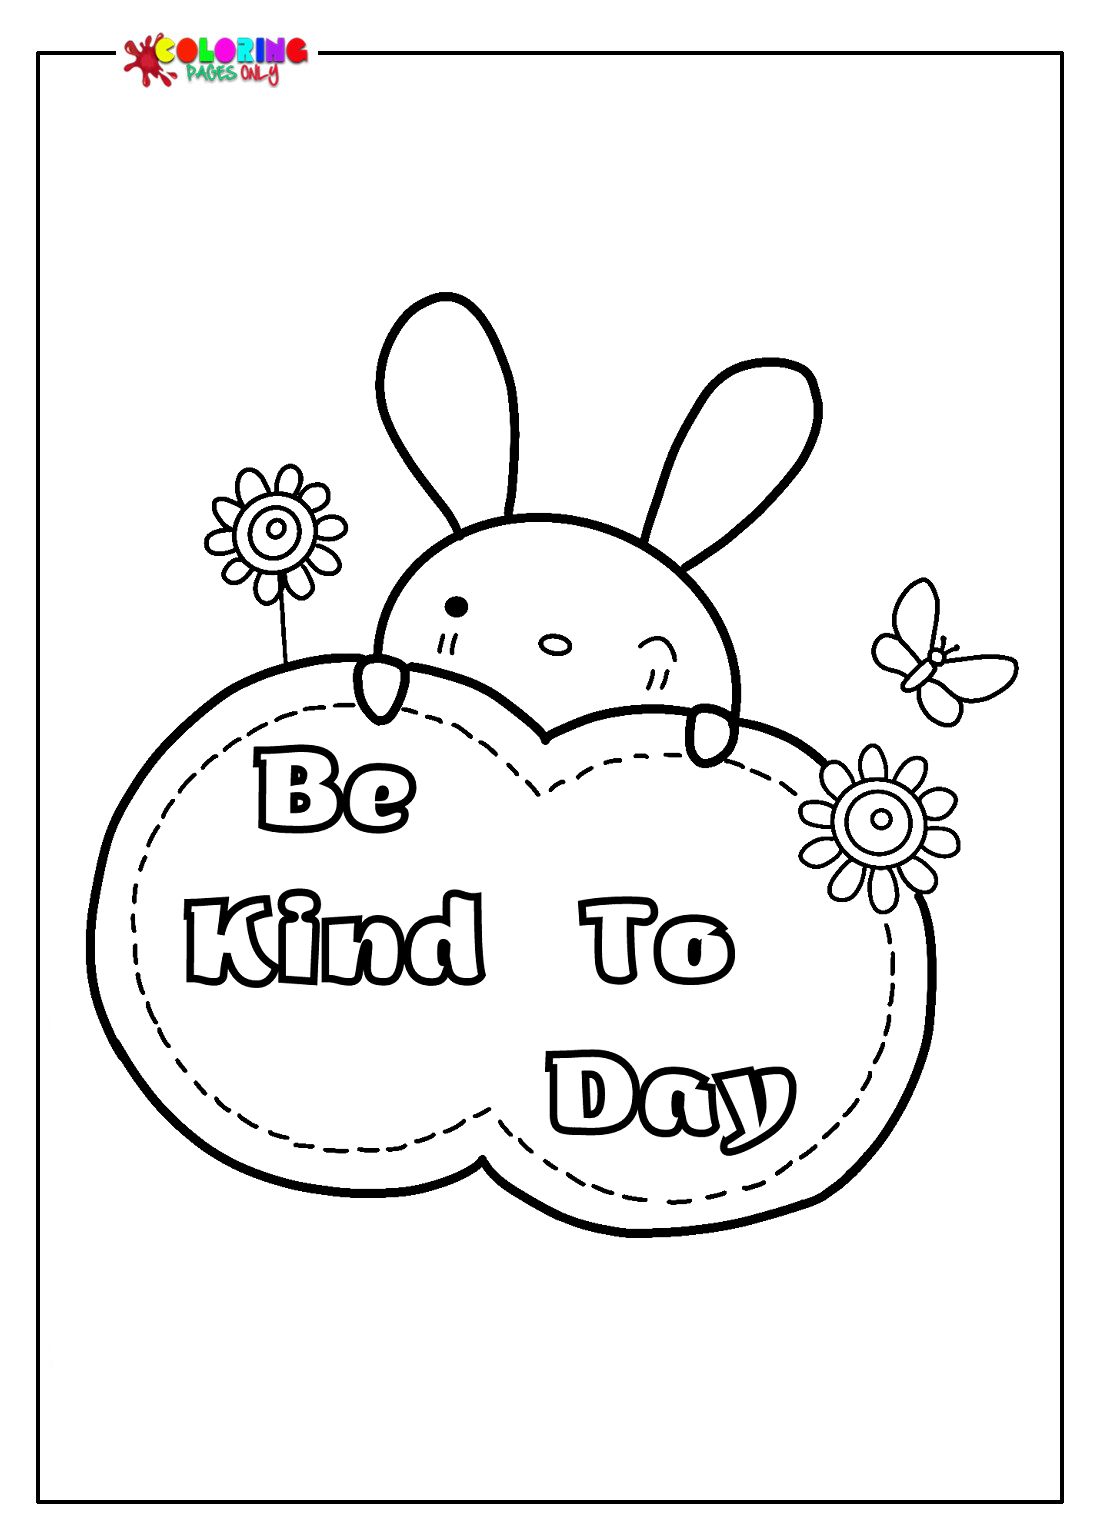 Be Kind To Day Coloring Pages